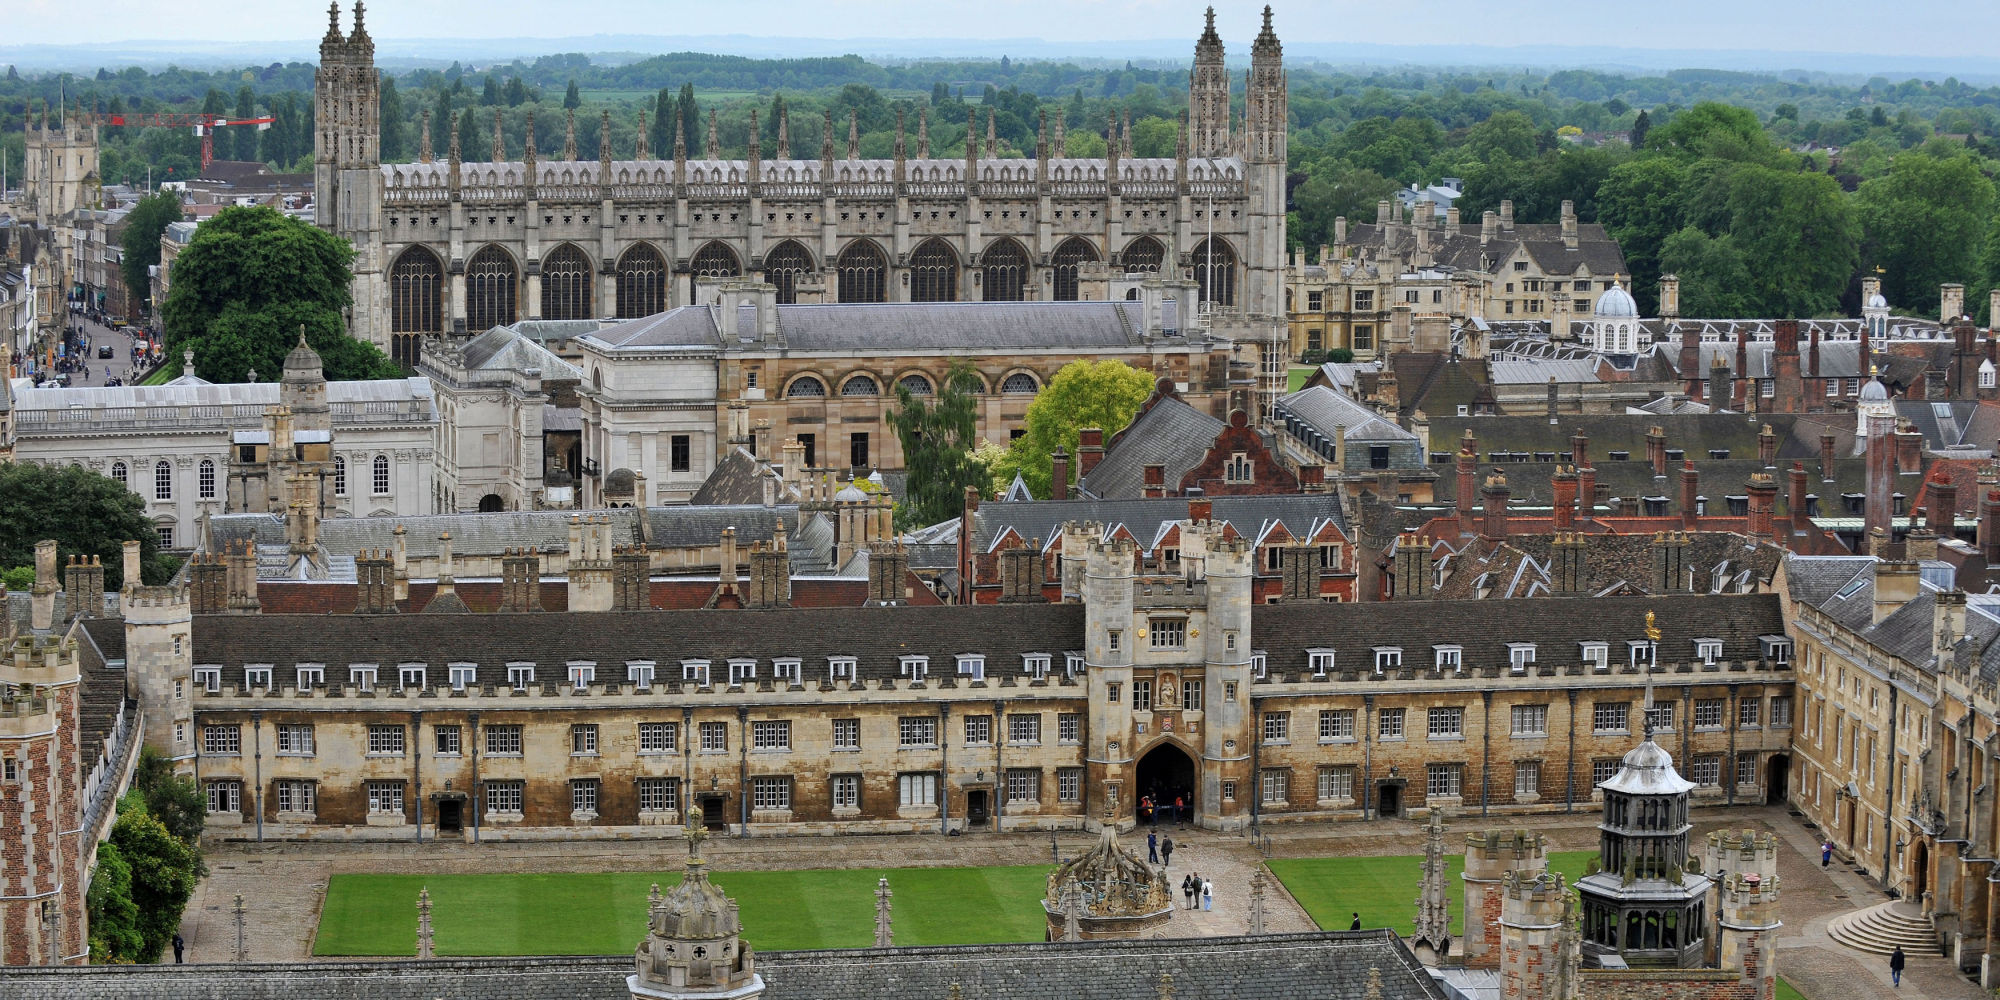 I Spent Three Years at Cambridge University and It Made Me an Arrogant